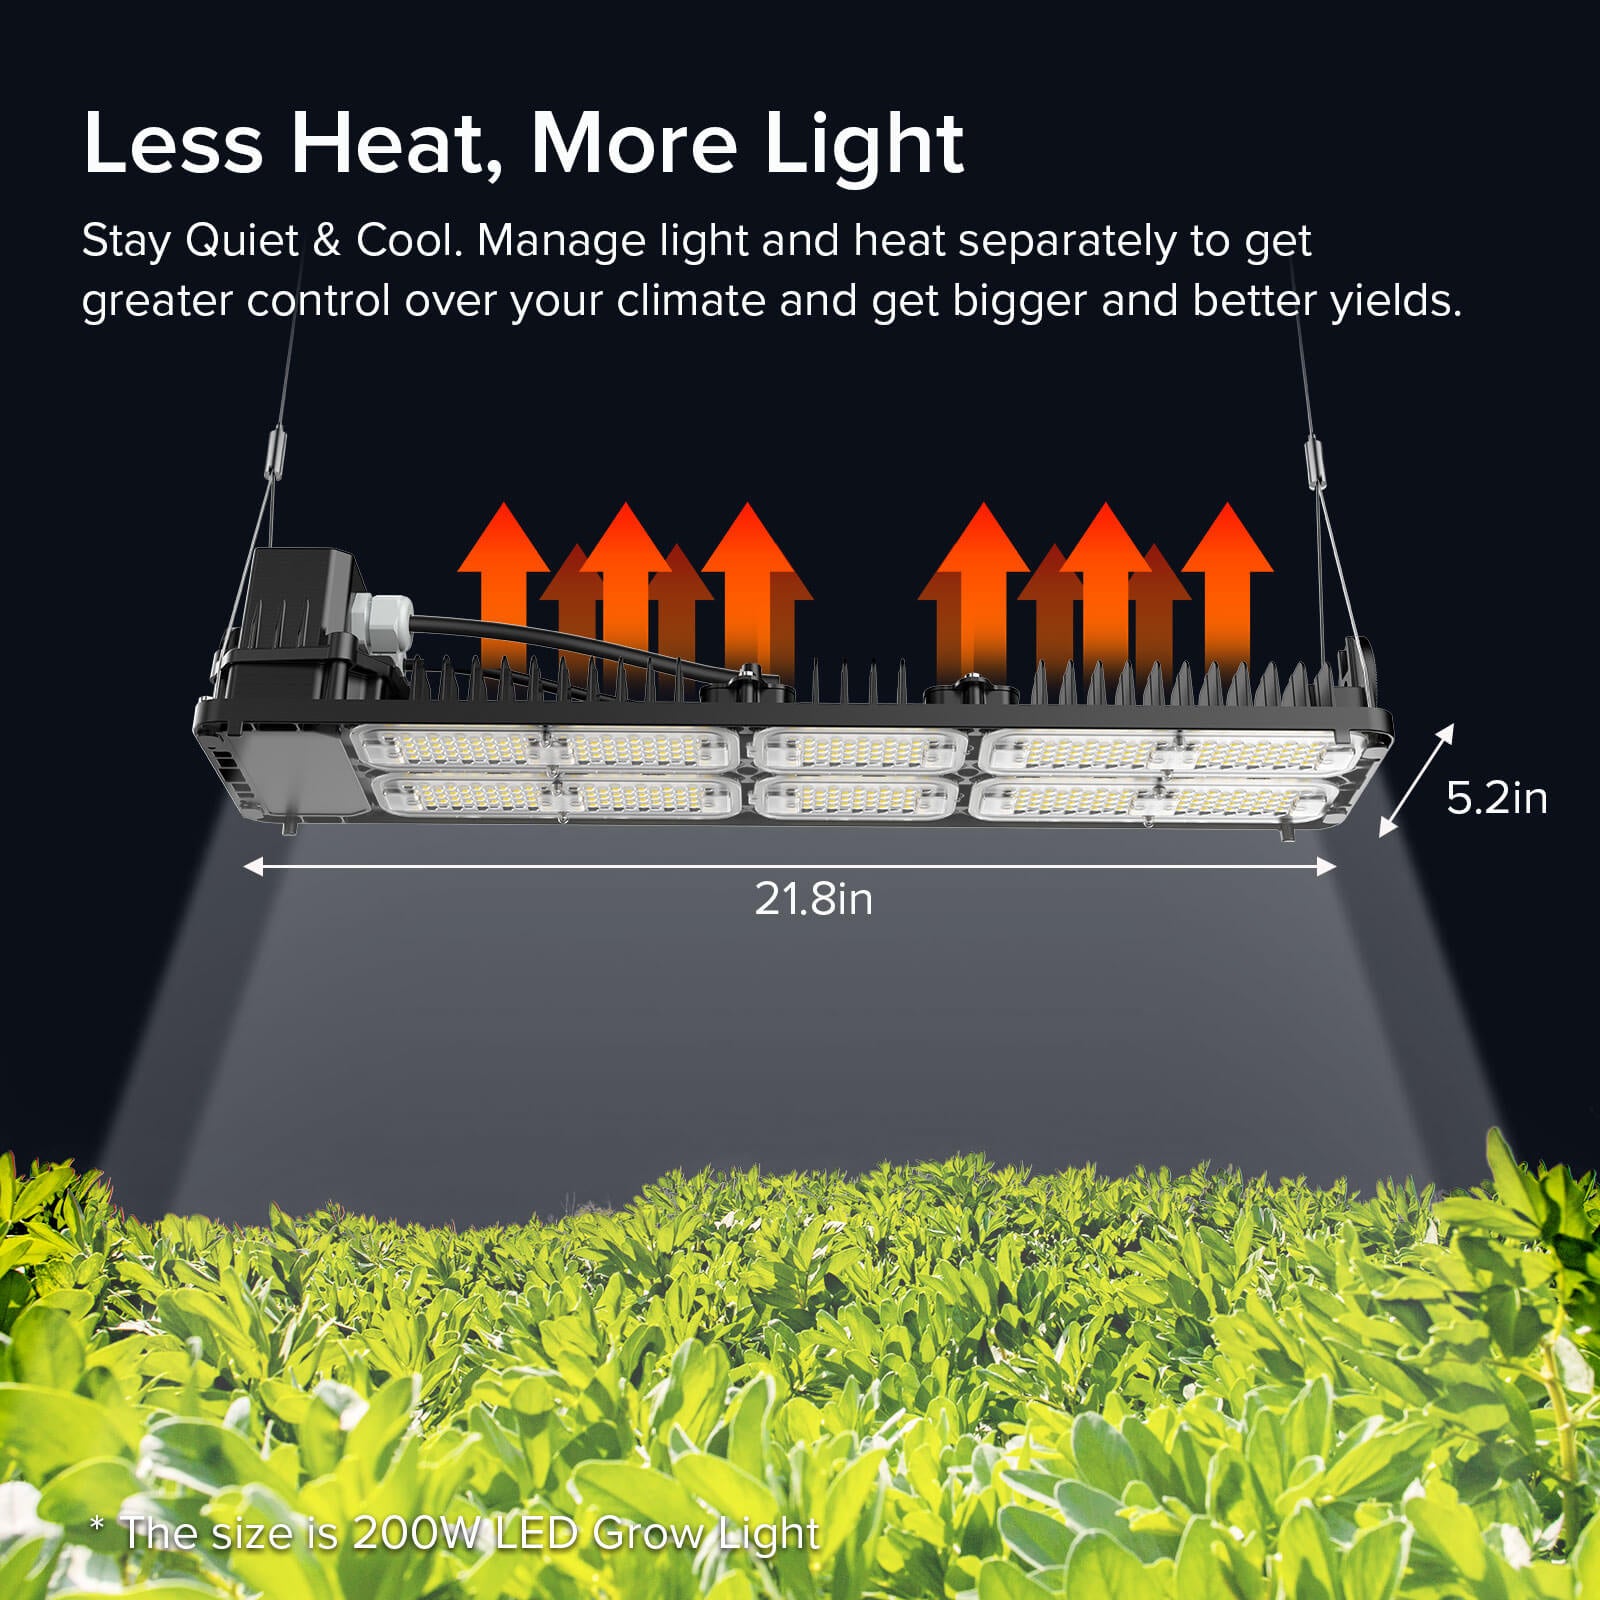 Dimmable 200W led grow light for Grow Tent is less heat and more light